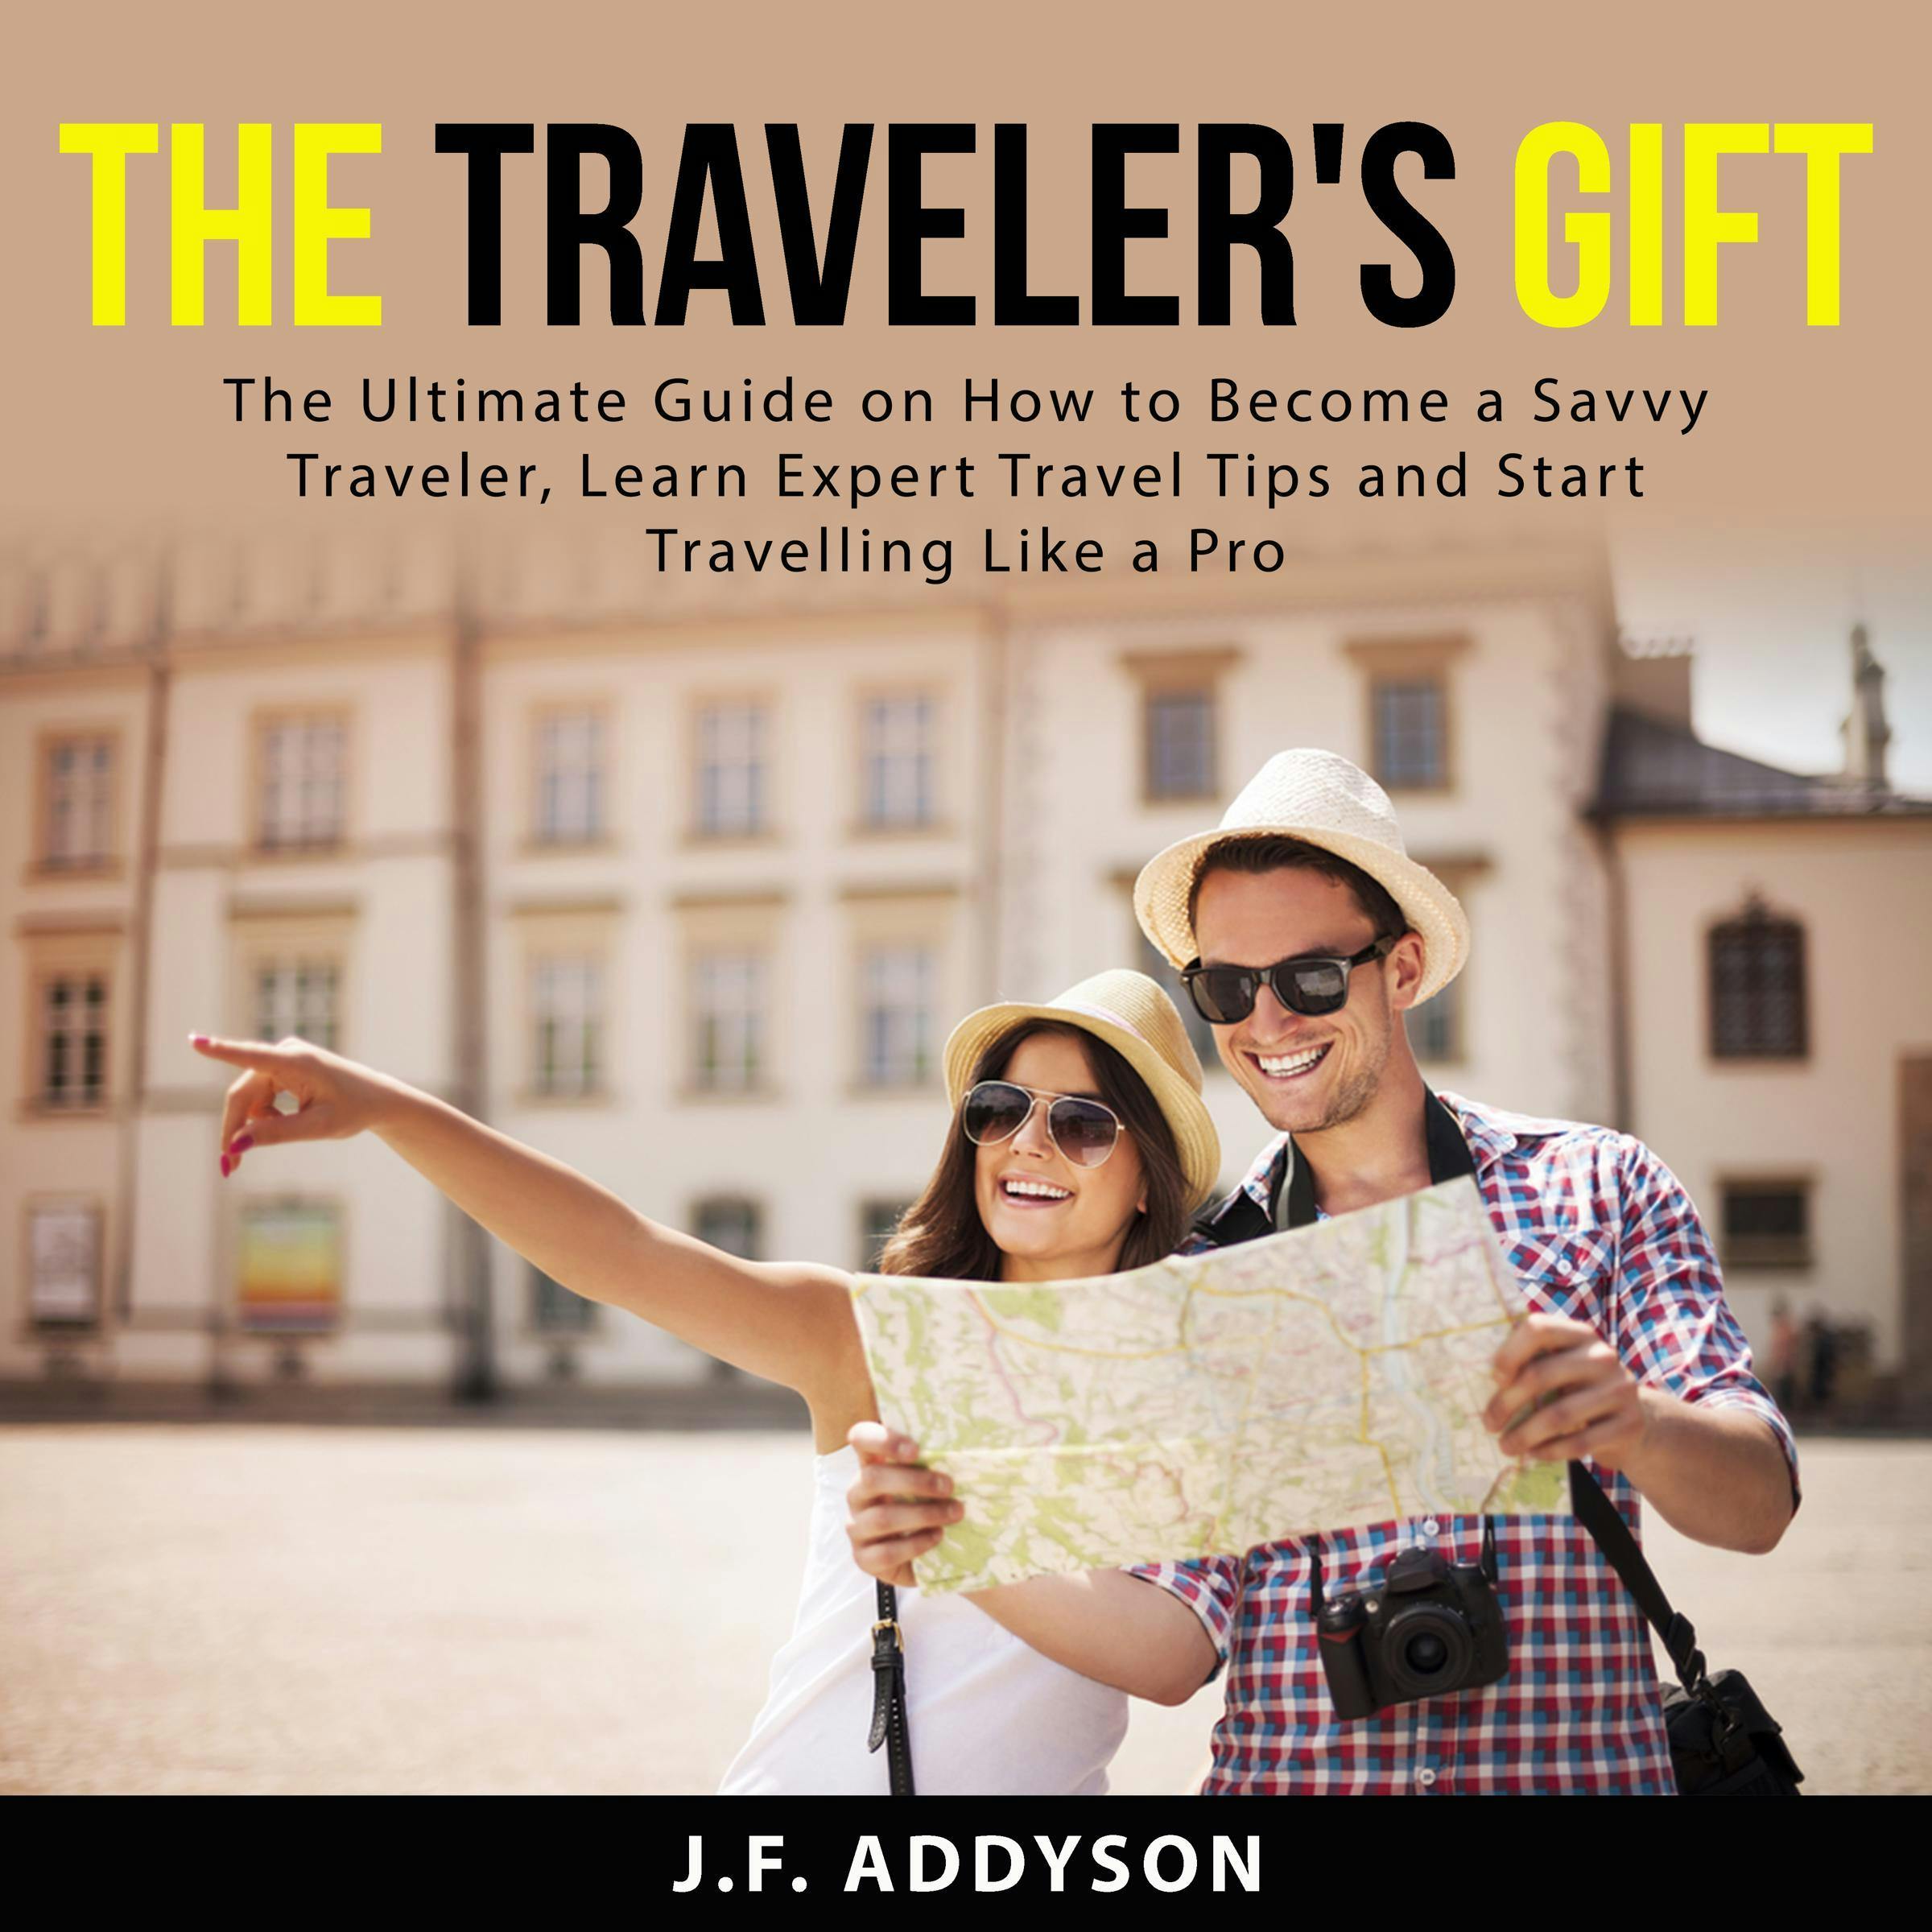 The Traveler's Gift: The Ultimate Guide on How to Become a Savvy Traveler, Learn Expert Travel Tips and and Start Travelling Like a Pro - undefined